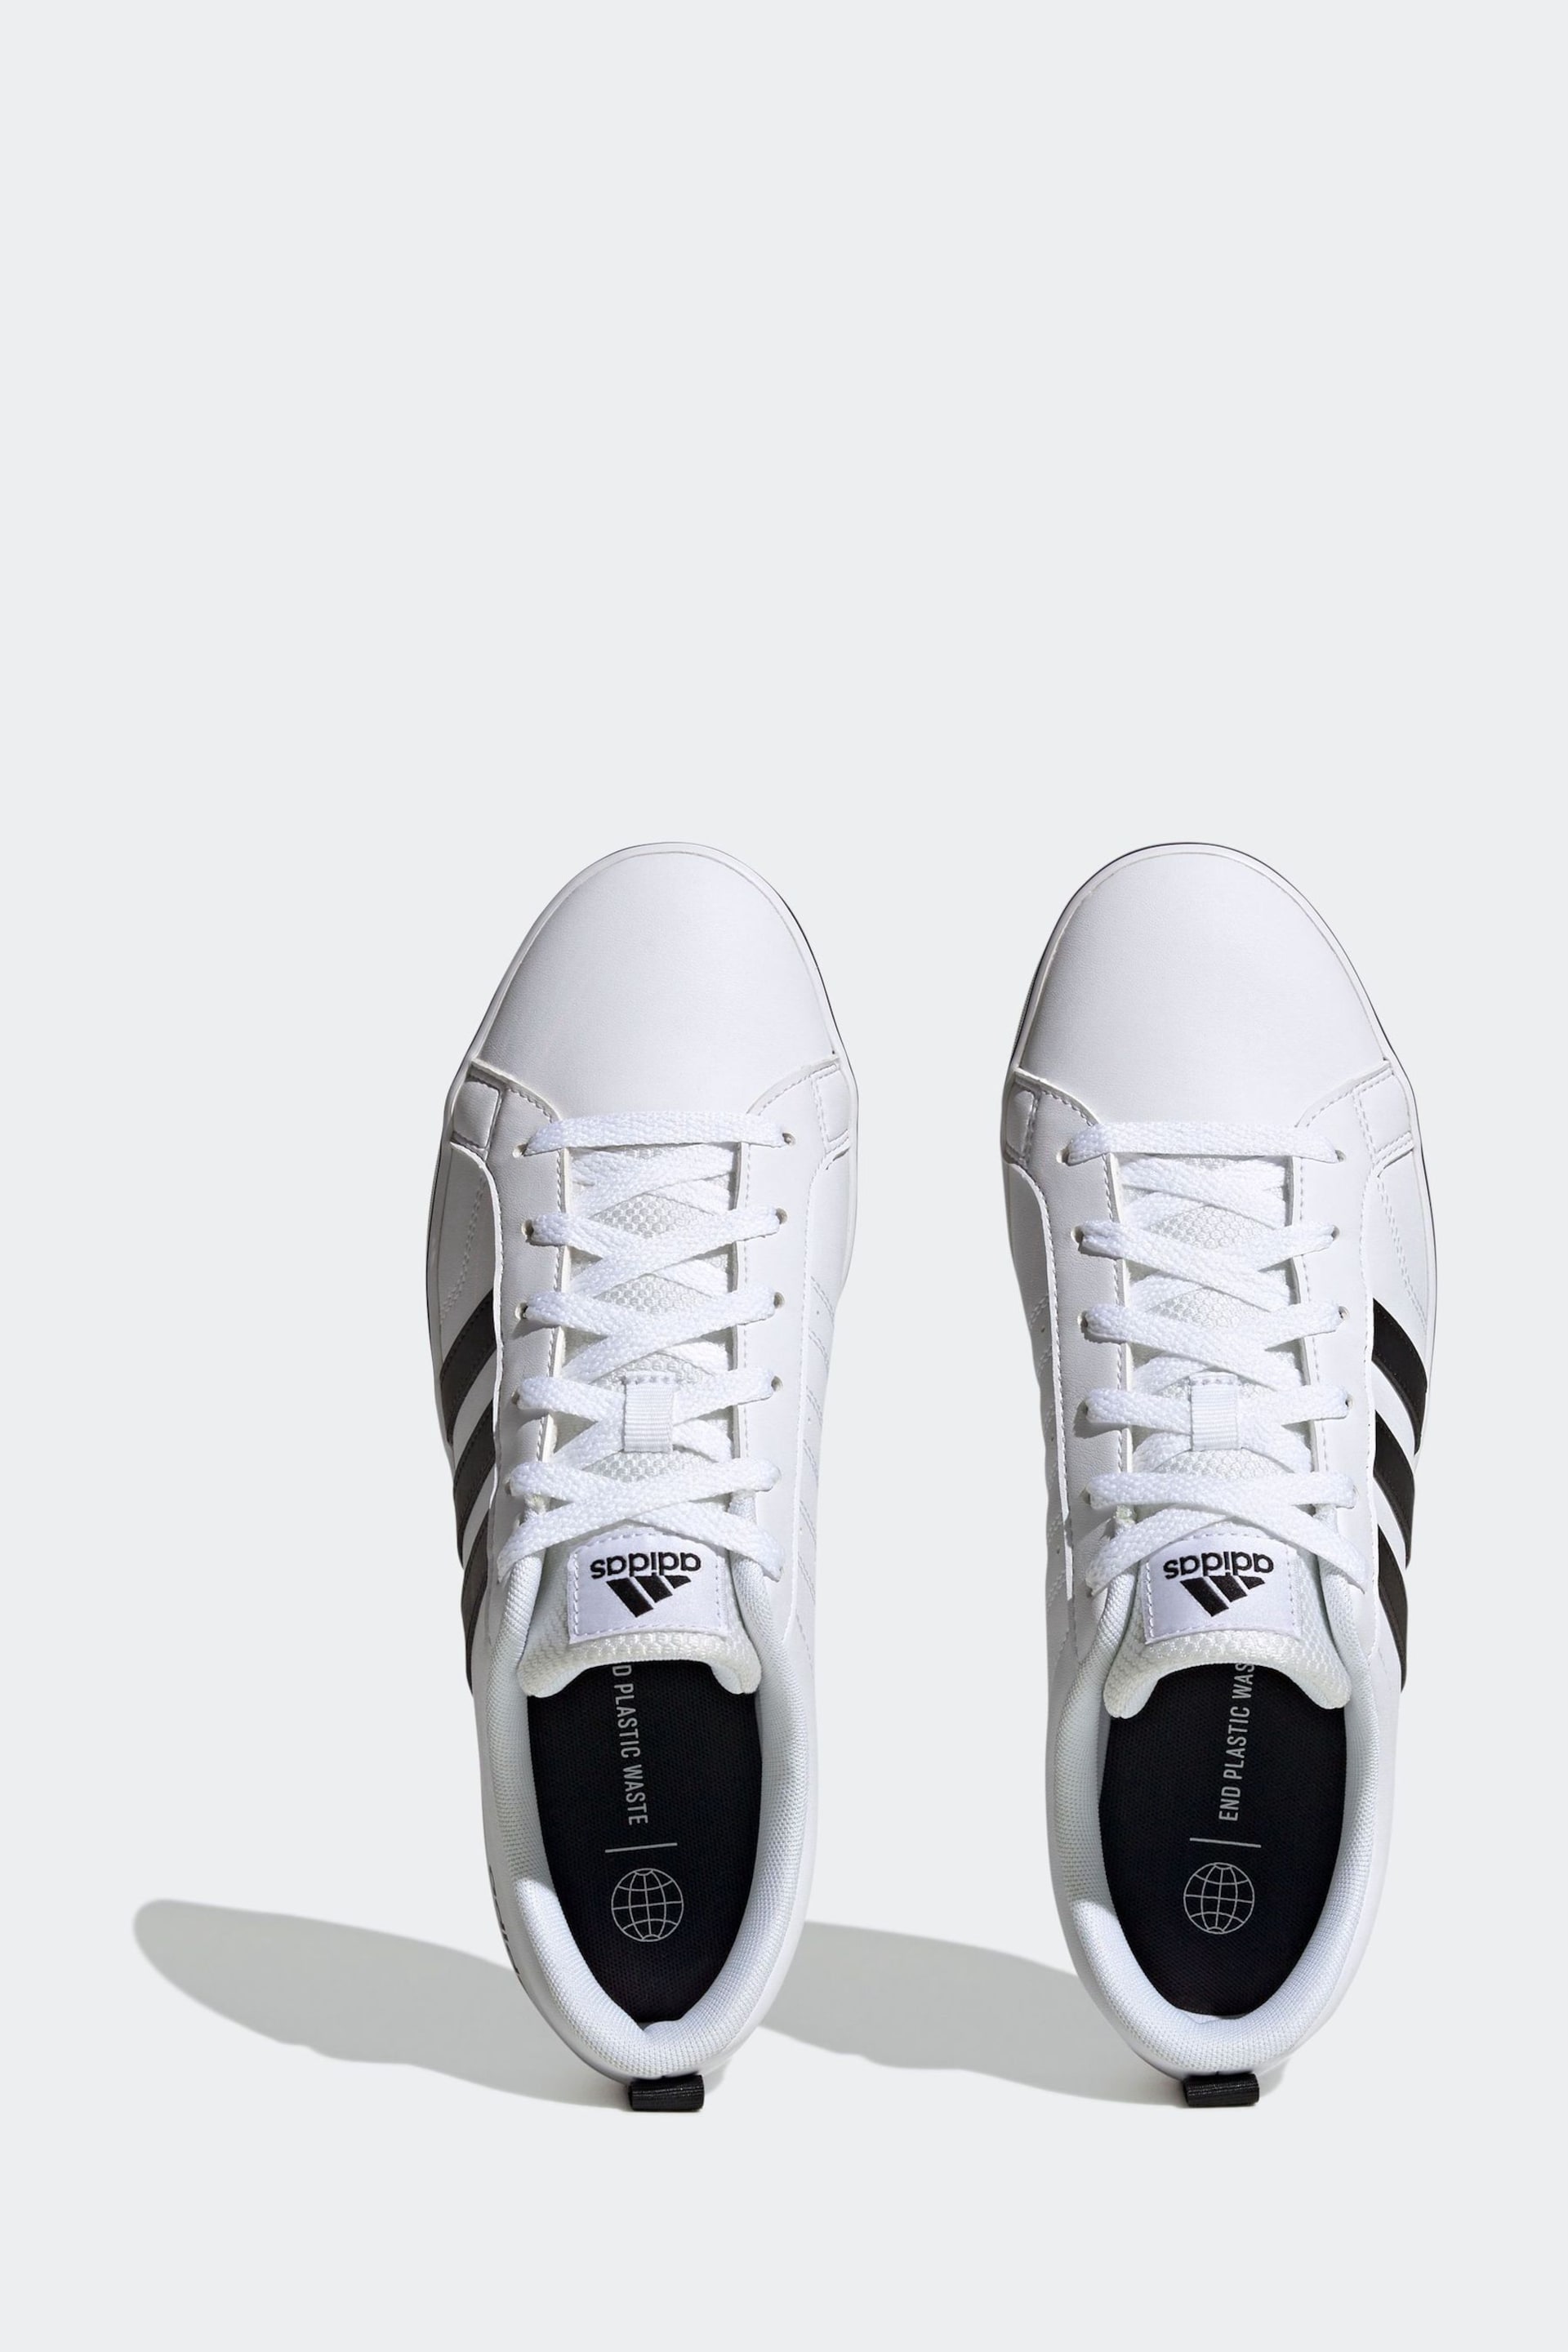 adidas White/Black Sportswear VS Pace Trainers - Image 5 of 9